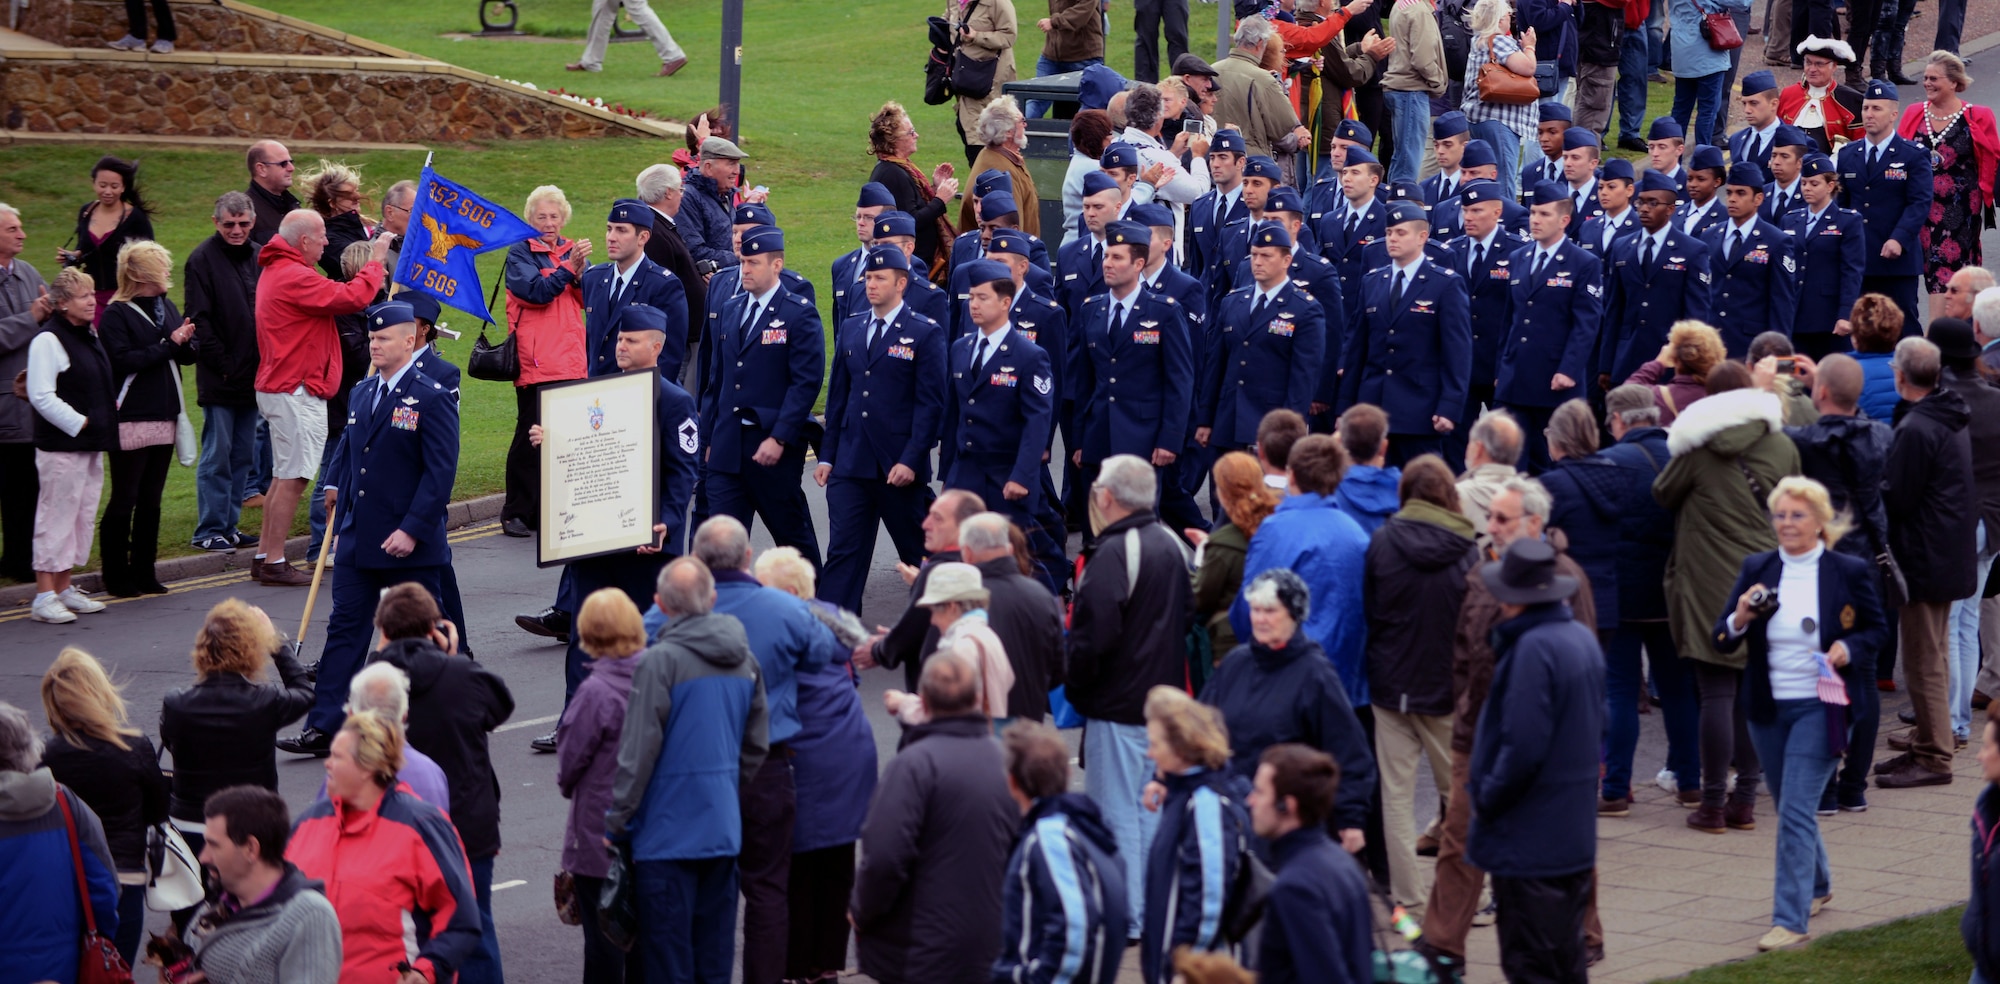 Airmen from the 67th Special Operations Squadron march in a parade after receiving the Freedom of Hunstanton, the highest award the town council is able to give, Oct. 4, 2014, in Hunstanton, England. The award was in commemoration of the lives saved by 67th Air Rescue Squadron Airmen during a flood in 1953. The town recognized the late Reis Leming in particular, who was an Airman 2nd Class at the time of the flood, for single-handedly saving 27 people. (U.S. Air Force photo/Airman 1st Class Preston Webb/Released)